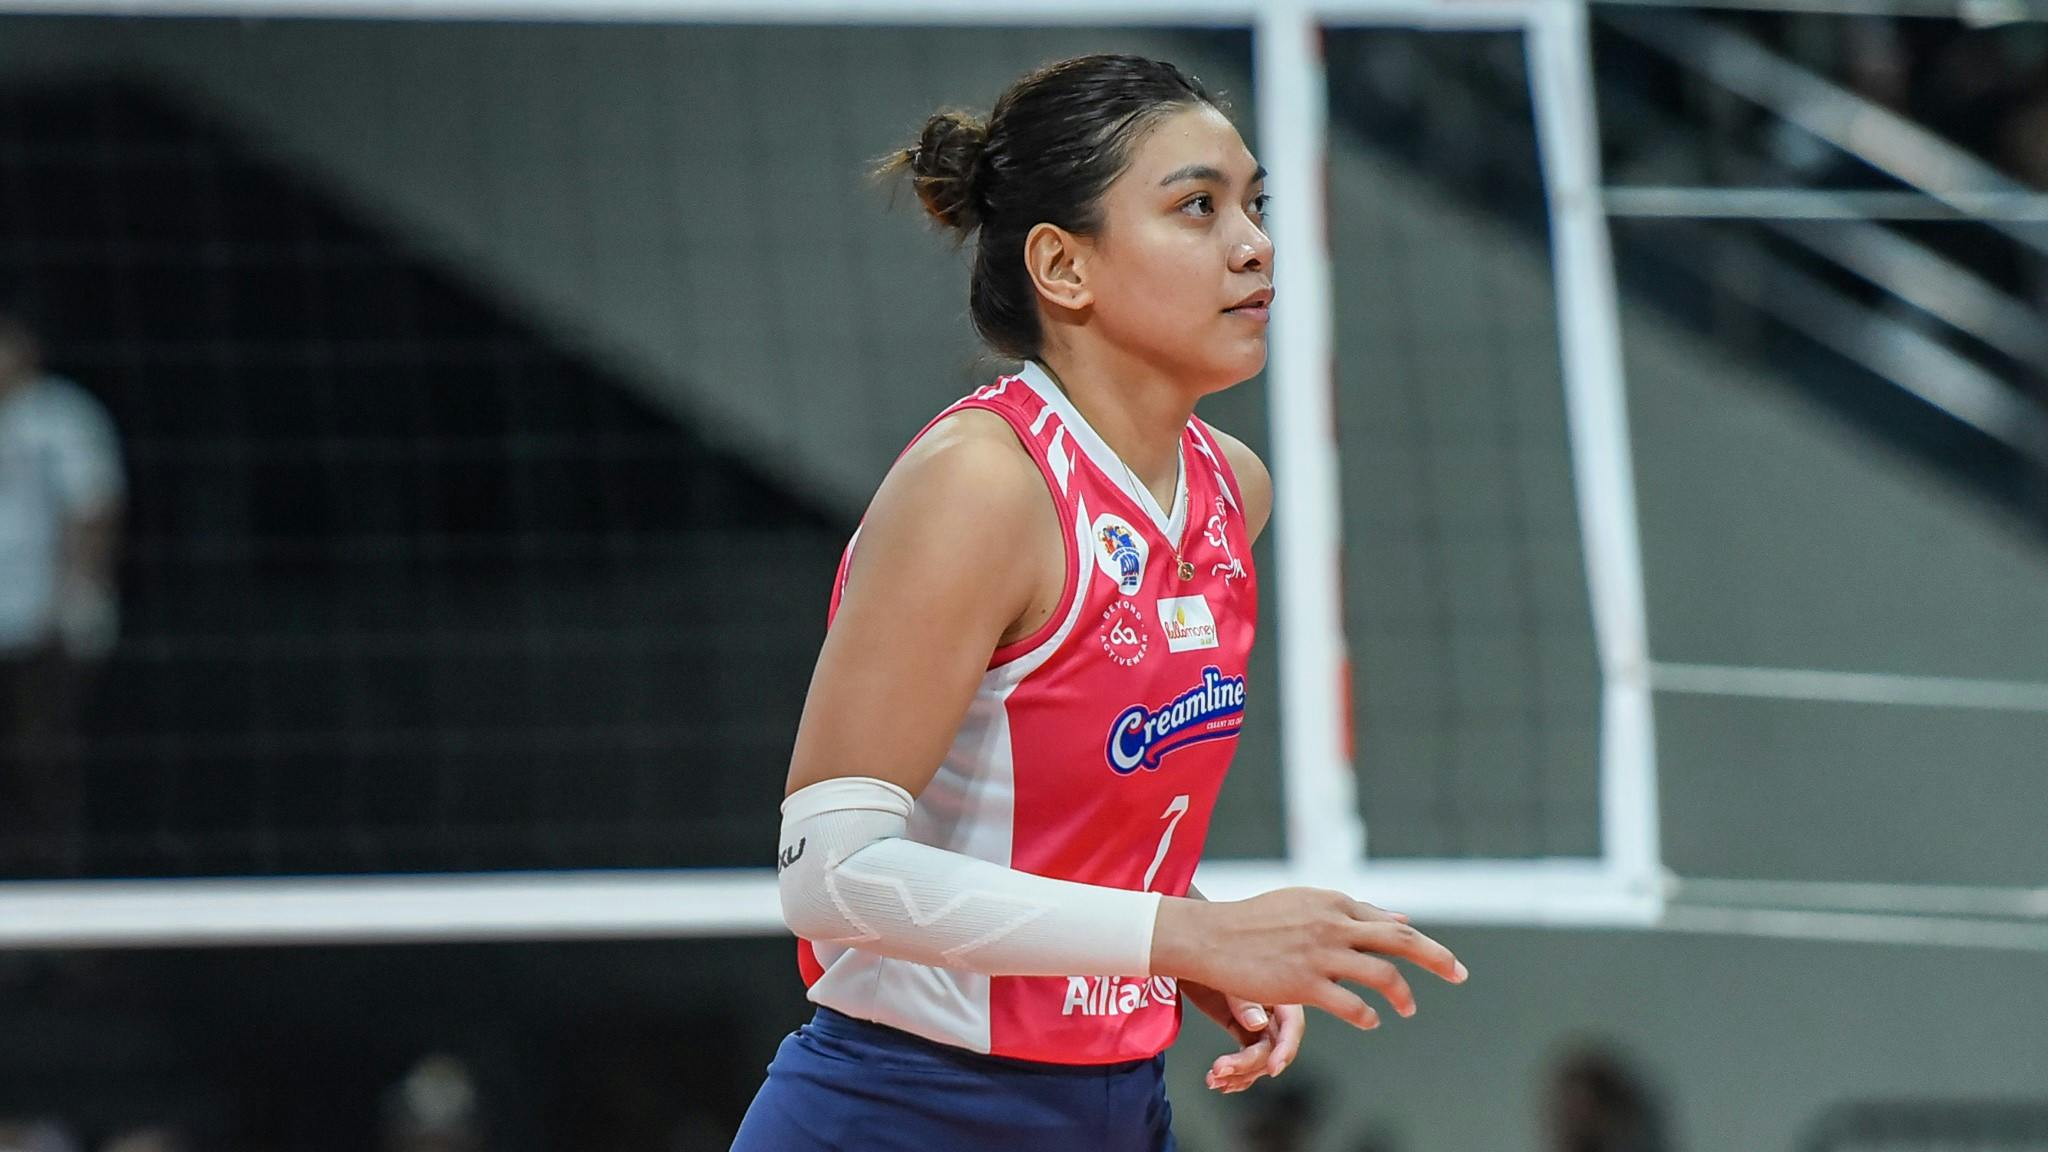 PVL: Alyssa Valdez glad to see Creamline regain form and confidence after loss to Petro Gazz